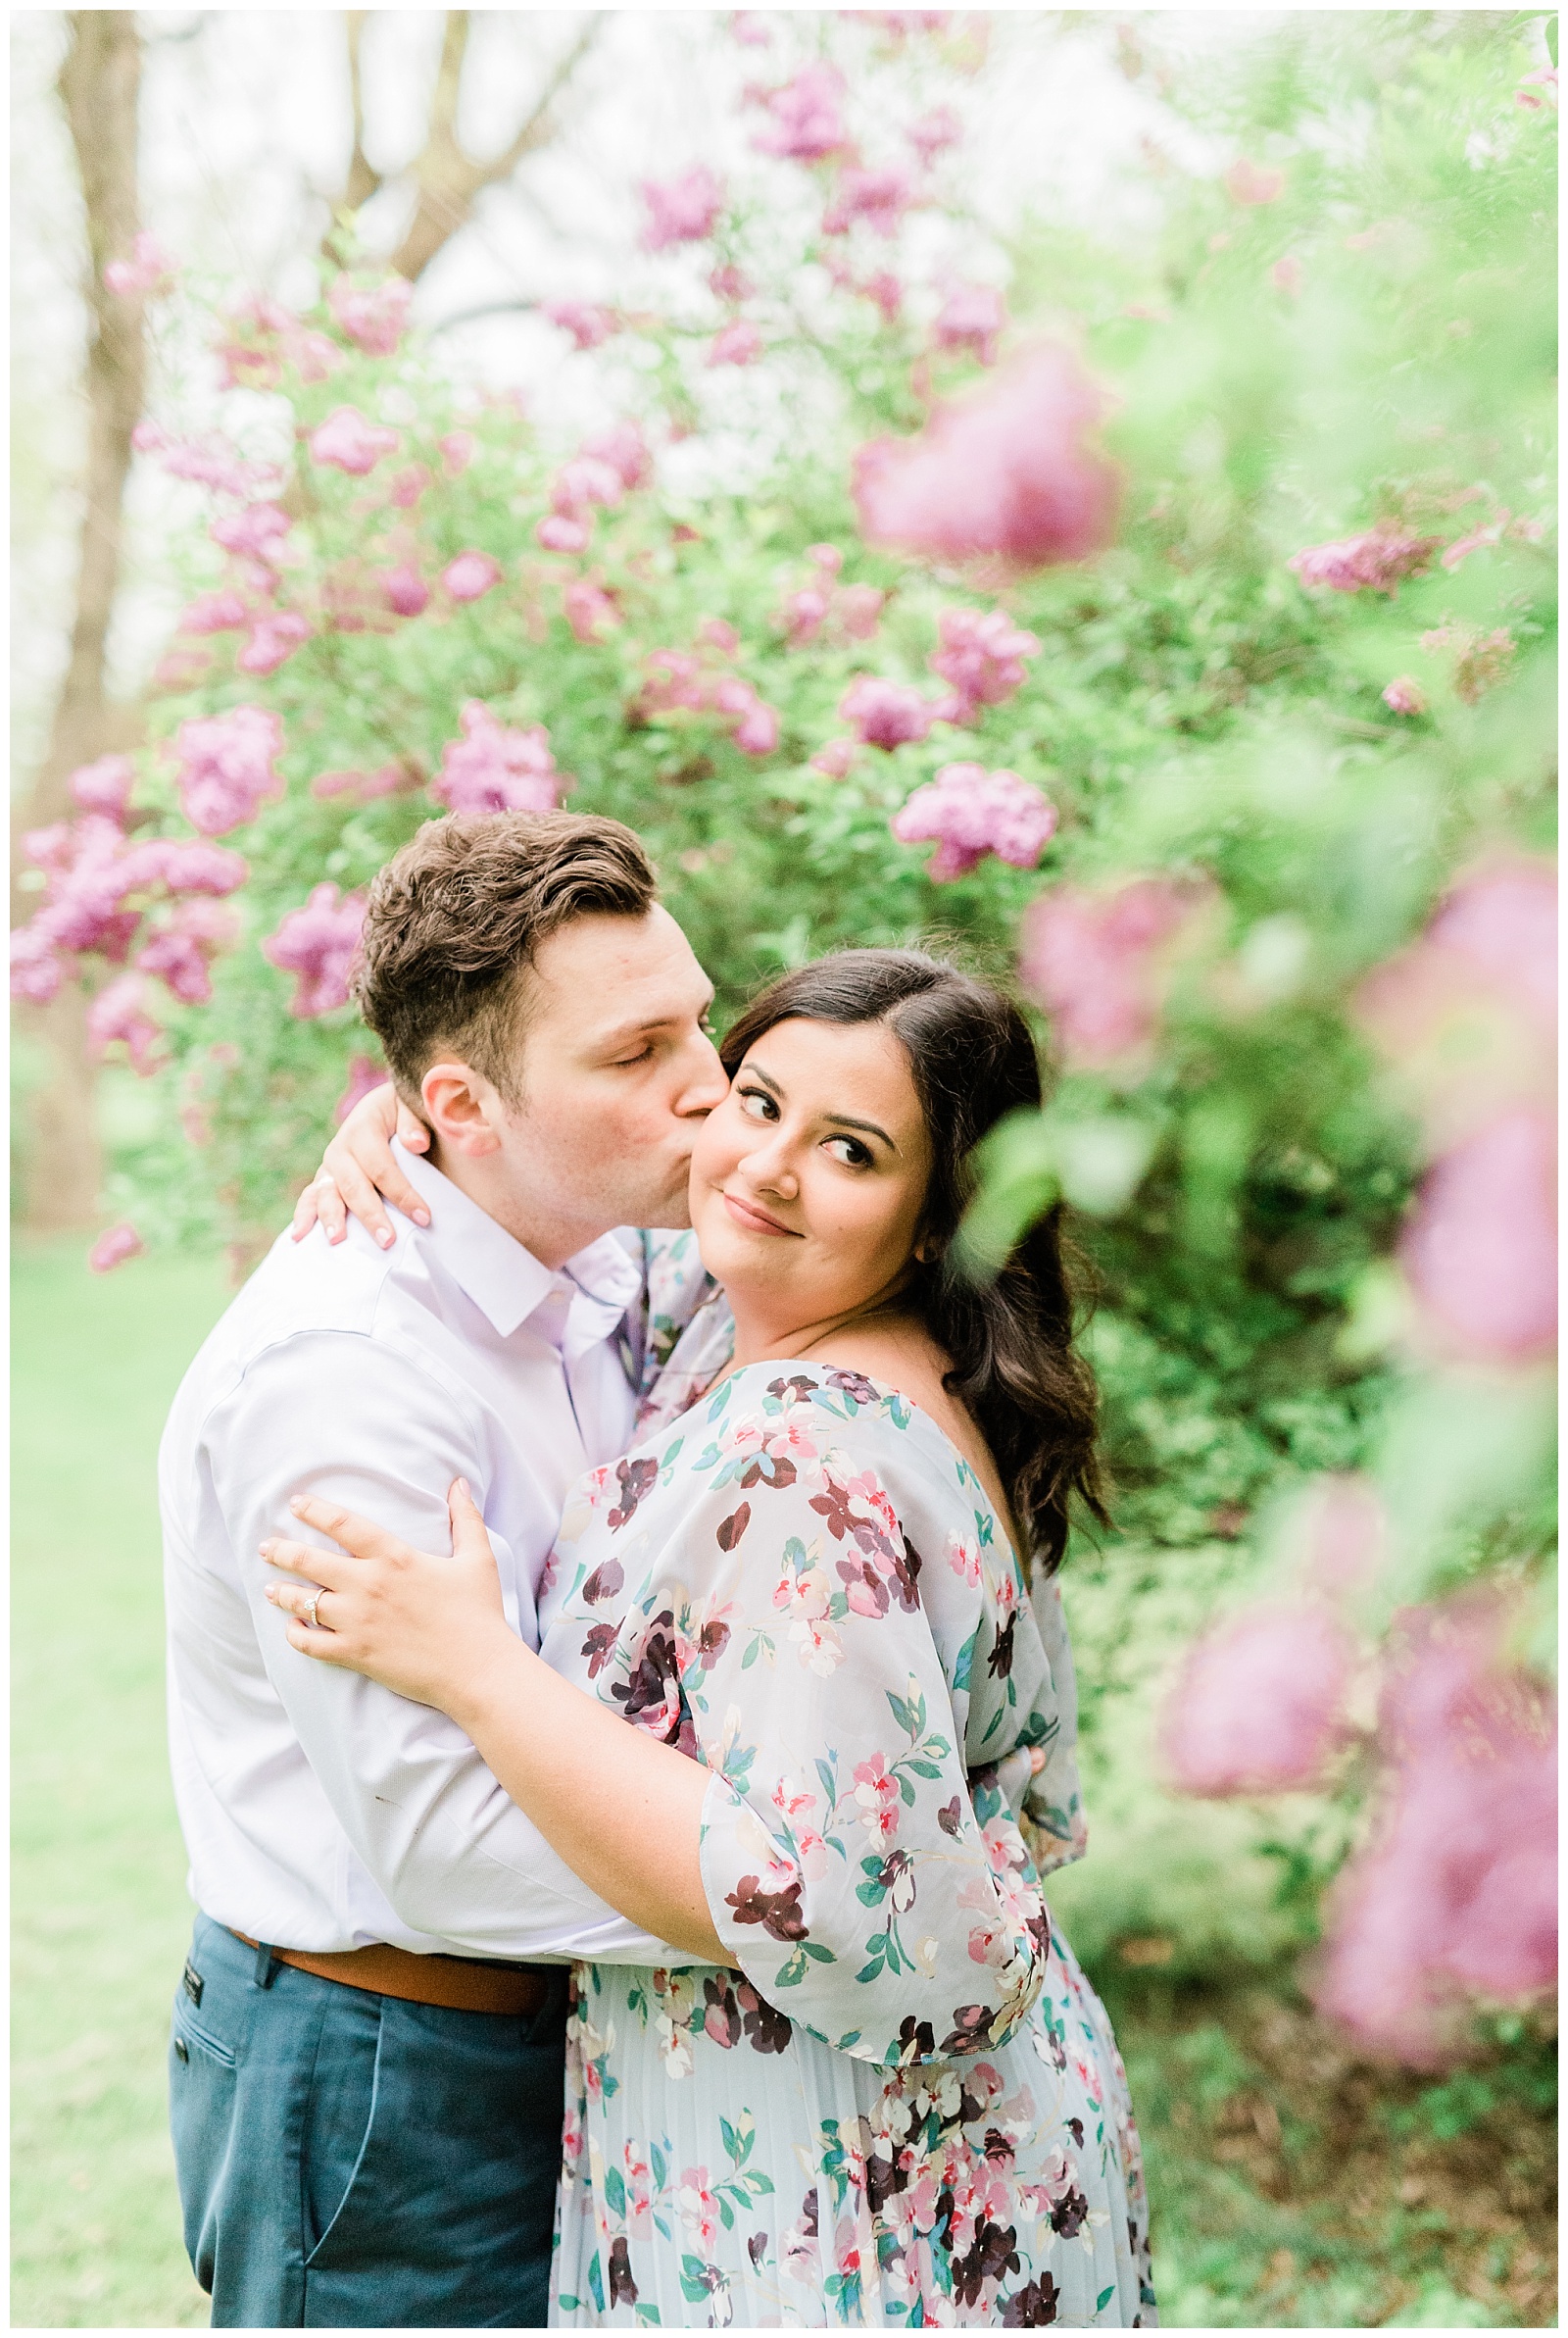 A man kisses a woman's cheek in the middle of lilac trees in a botanical garden.